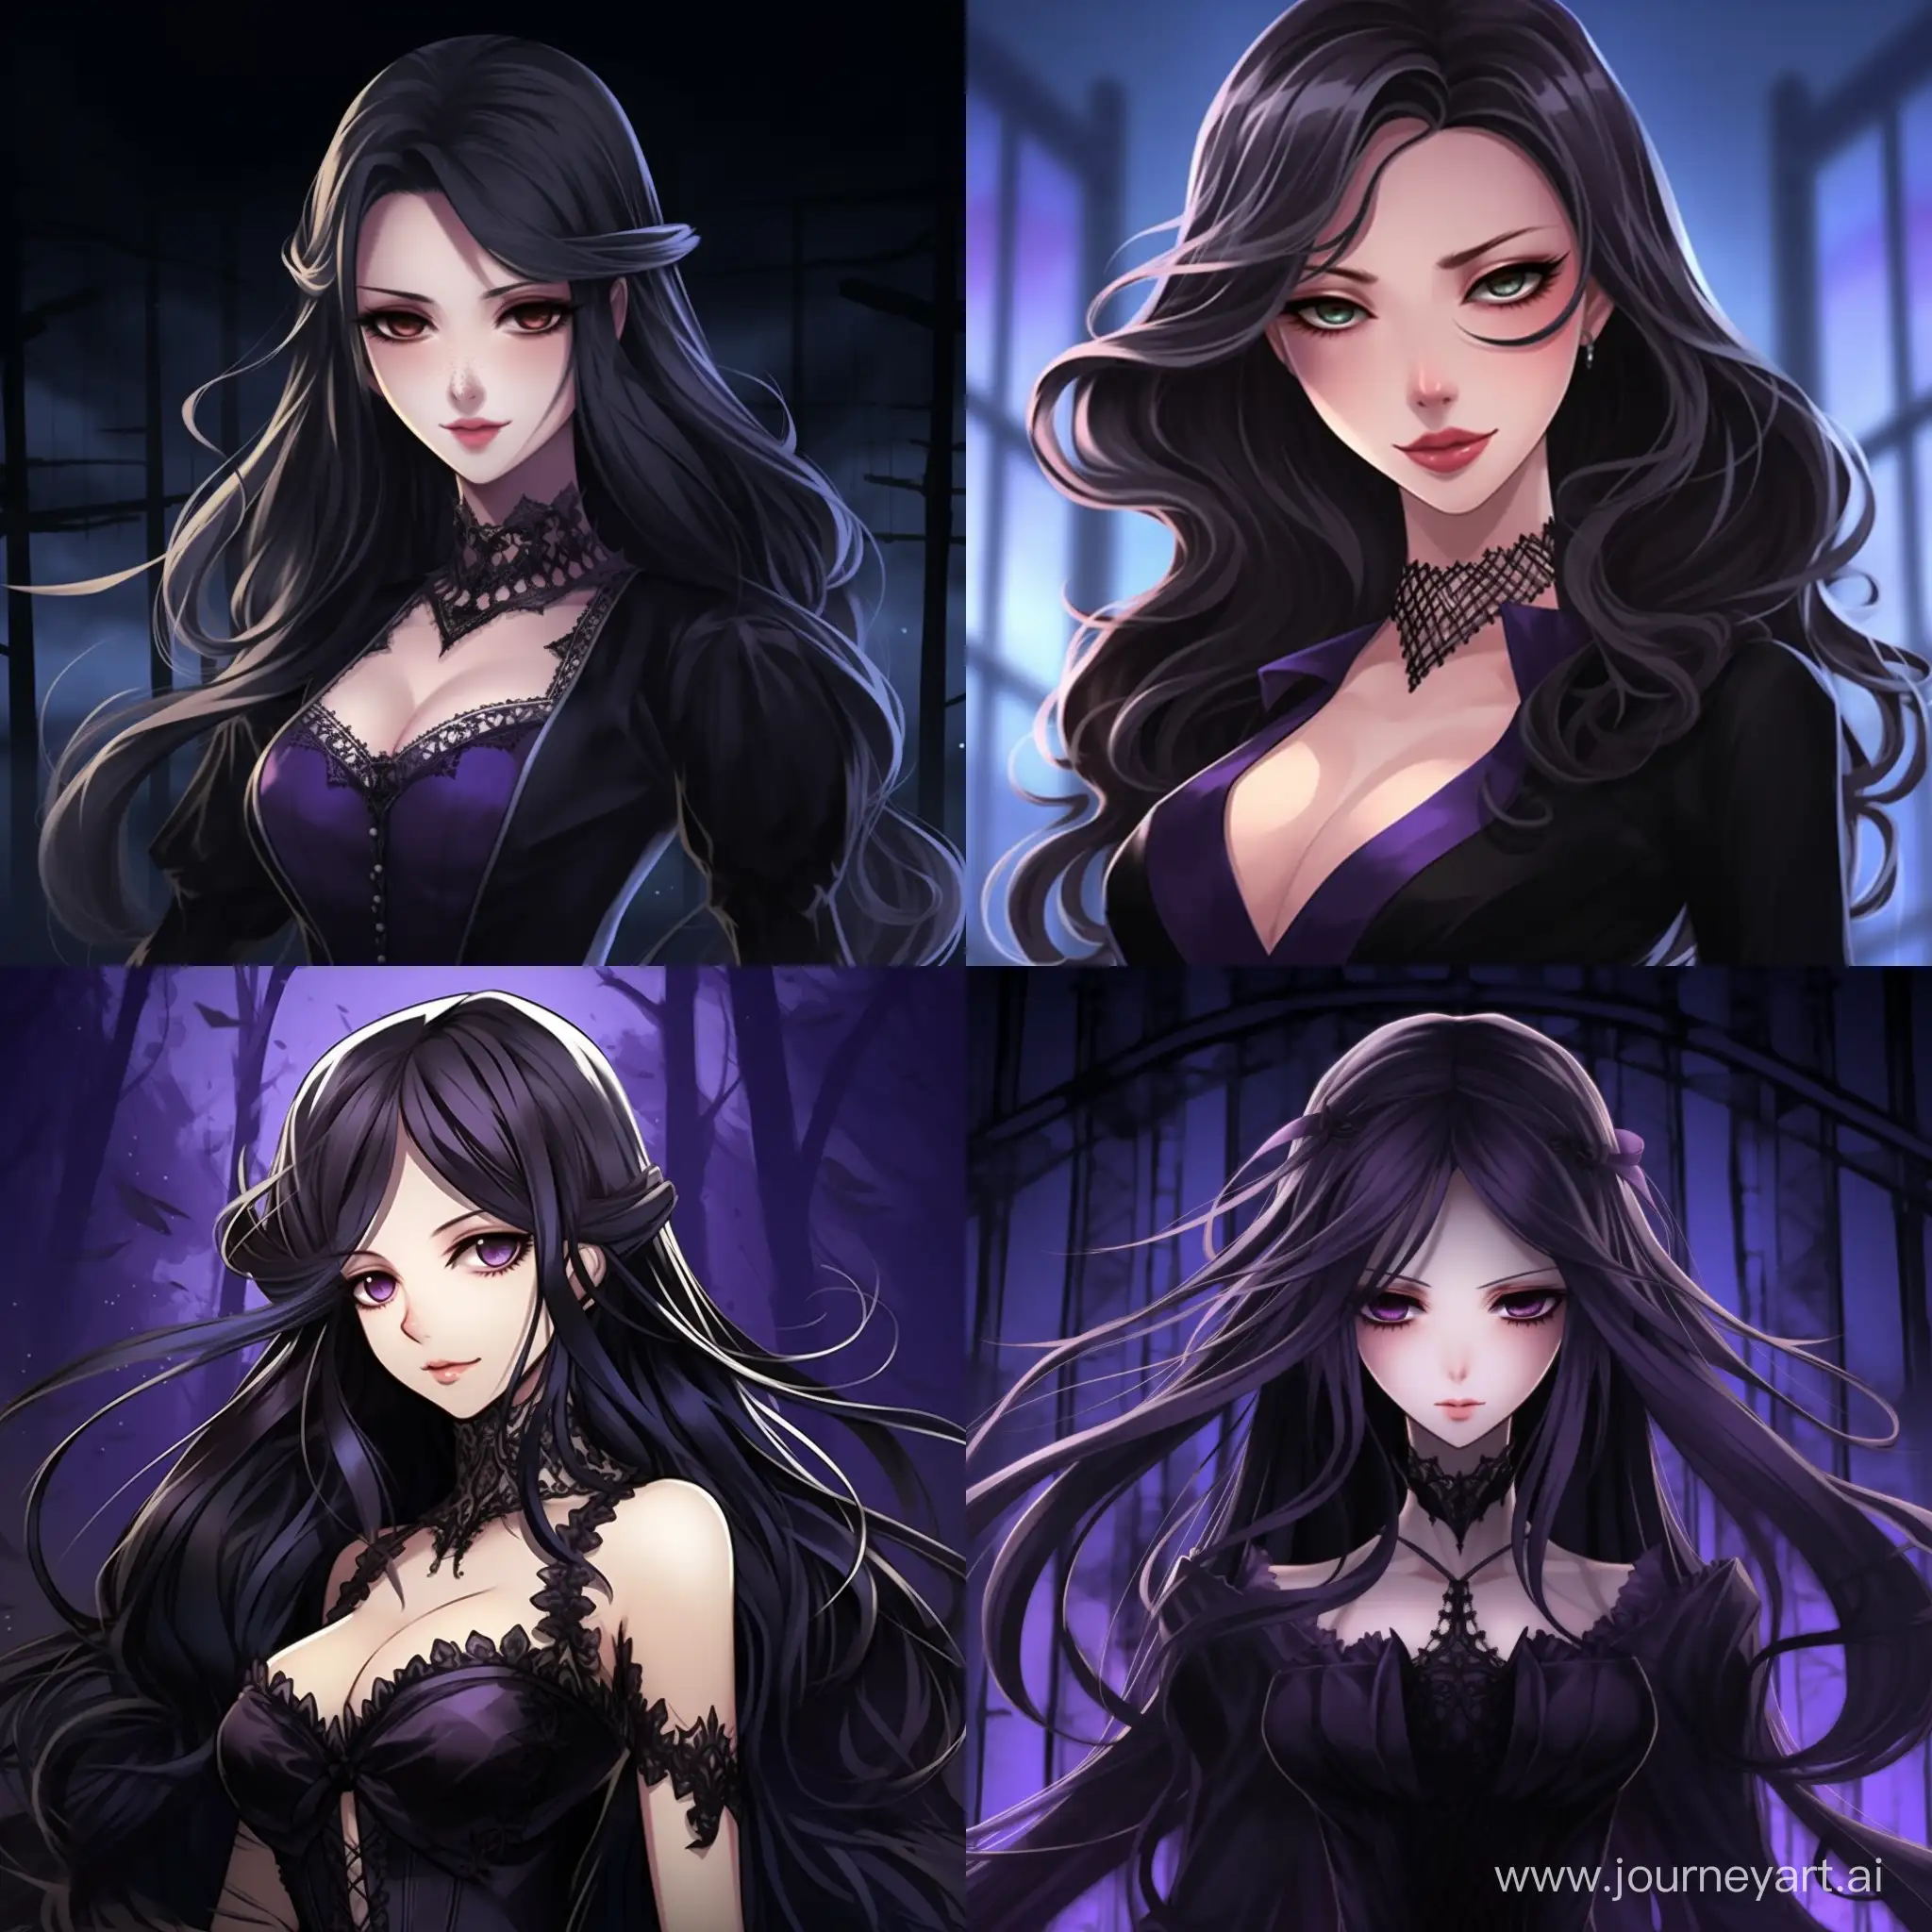 Anime-Vampire-Woman-in-Black-and-Purple-Luxurious-Dress